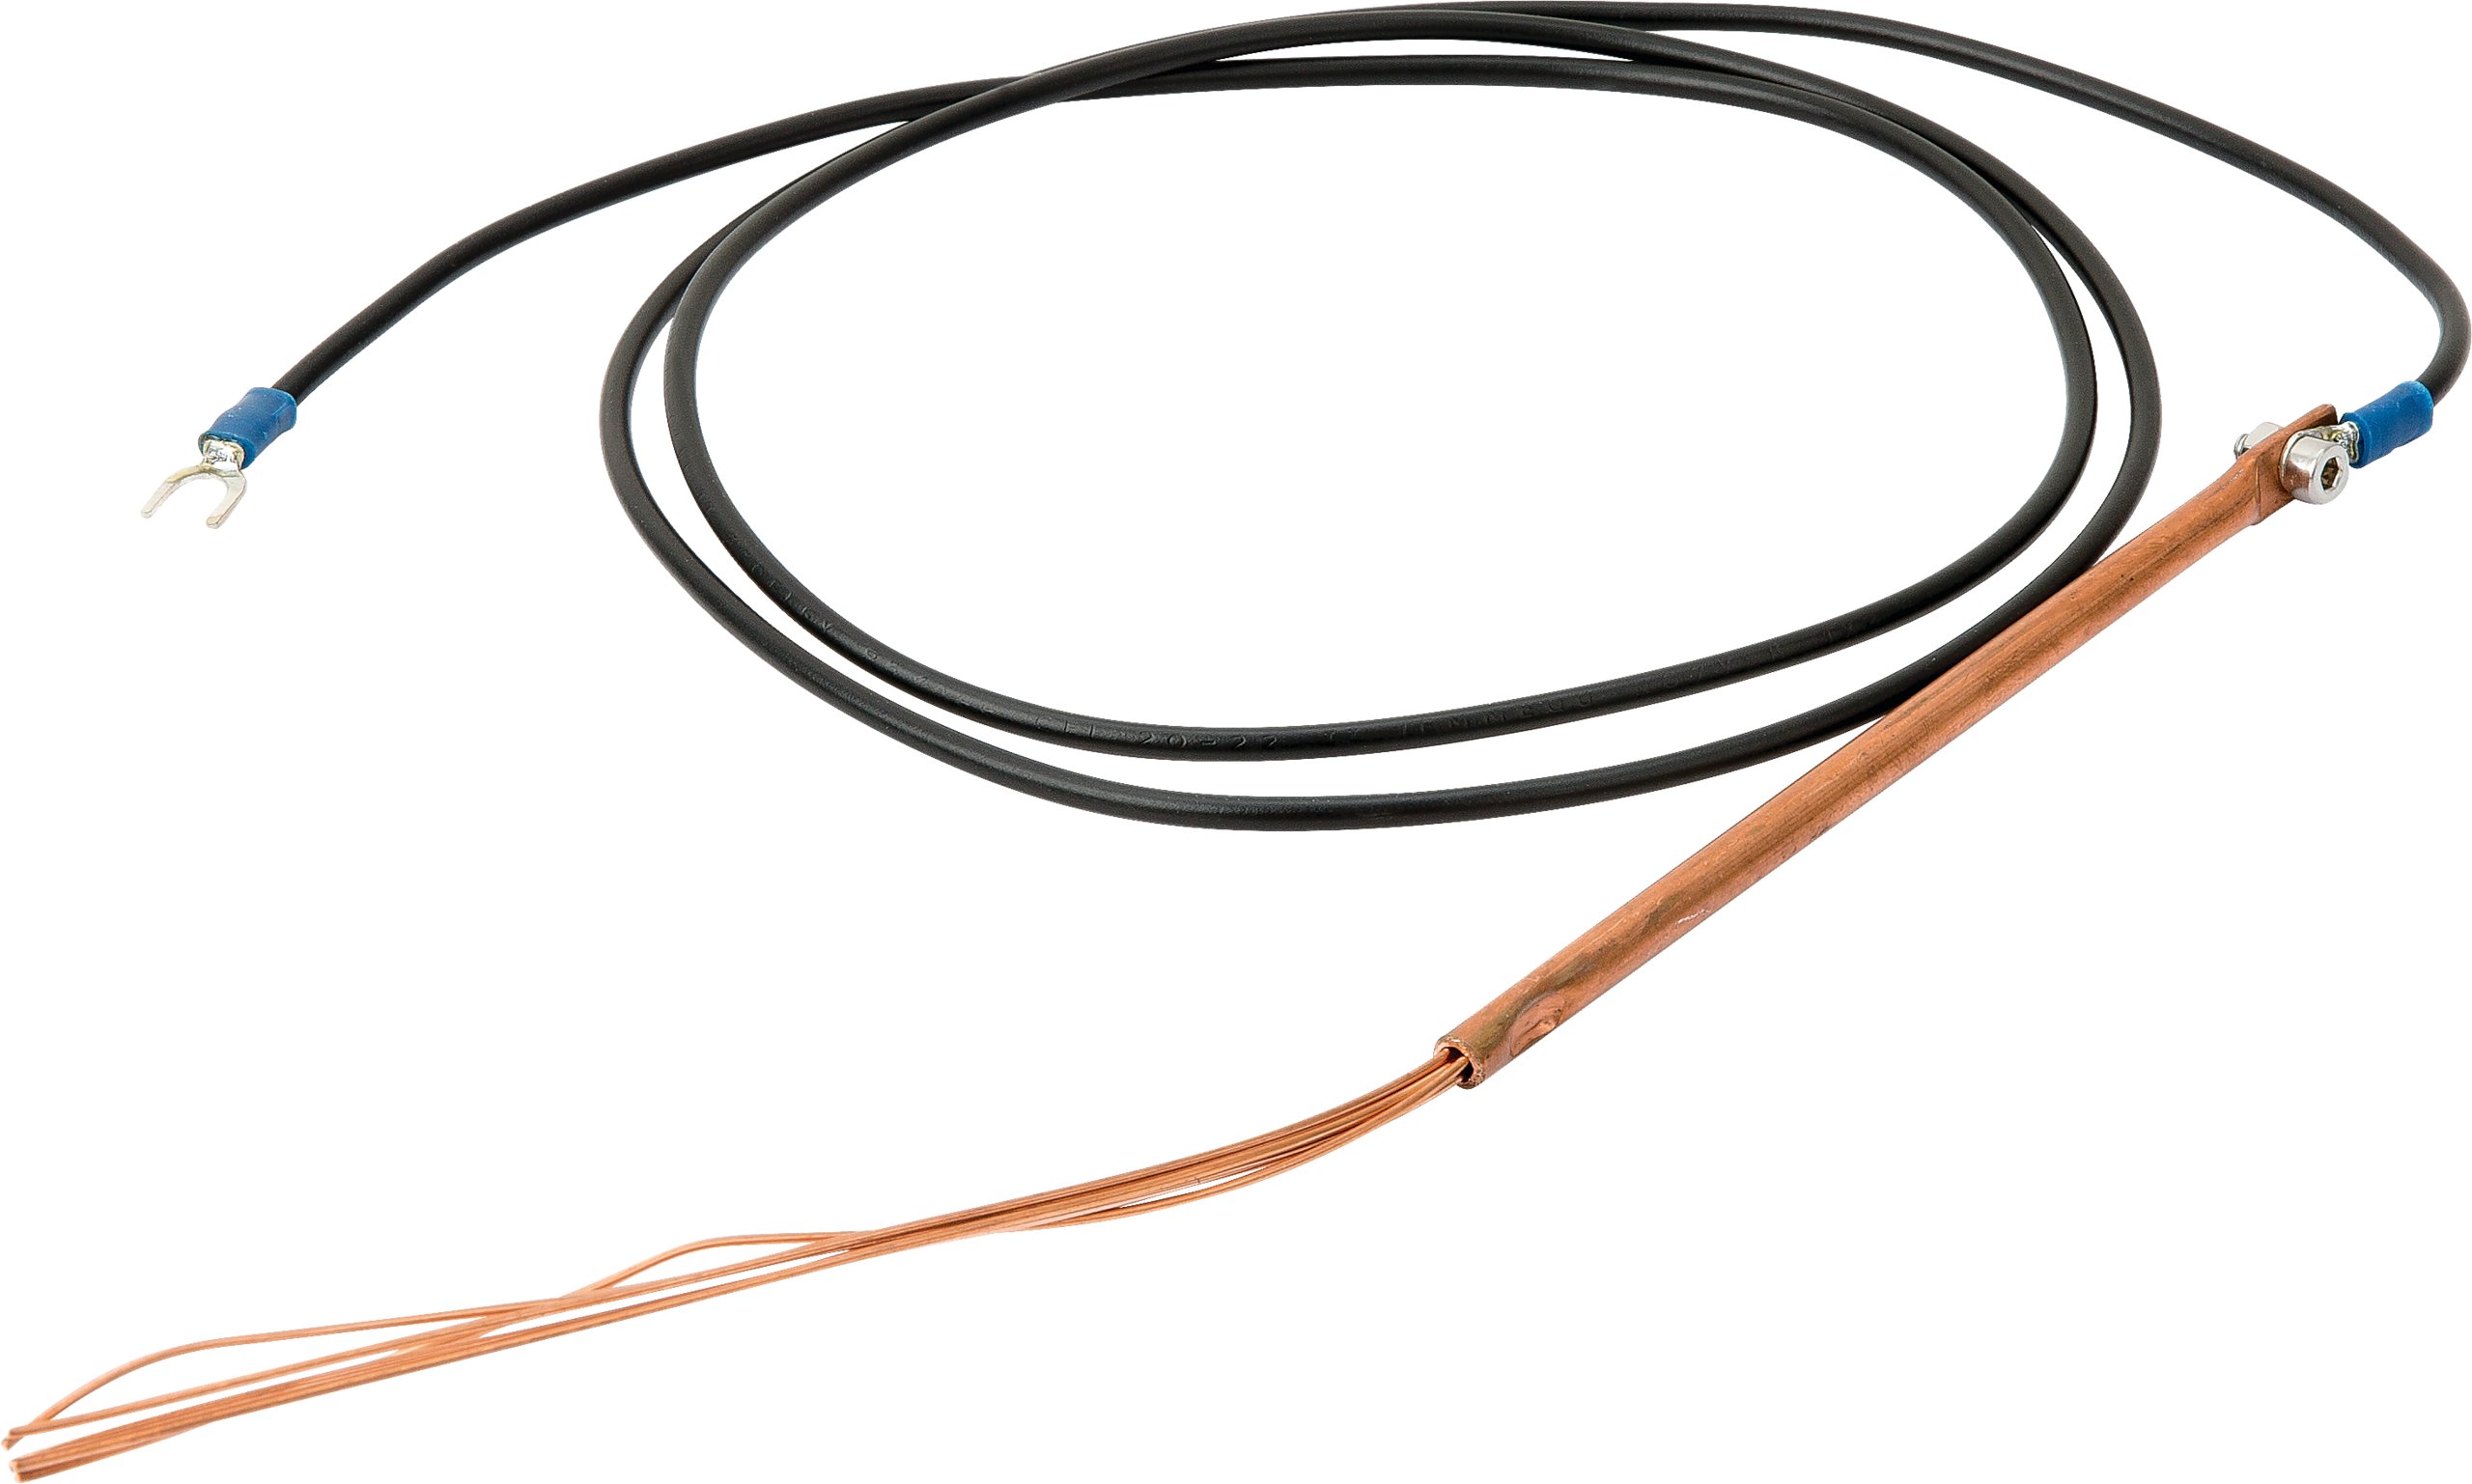 5 Hook Copper Wire Support for use with Garbarino & Titonel